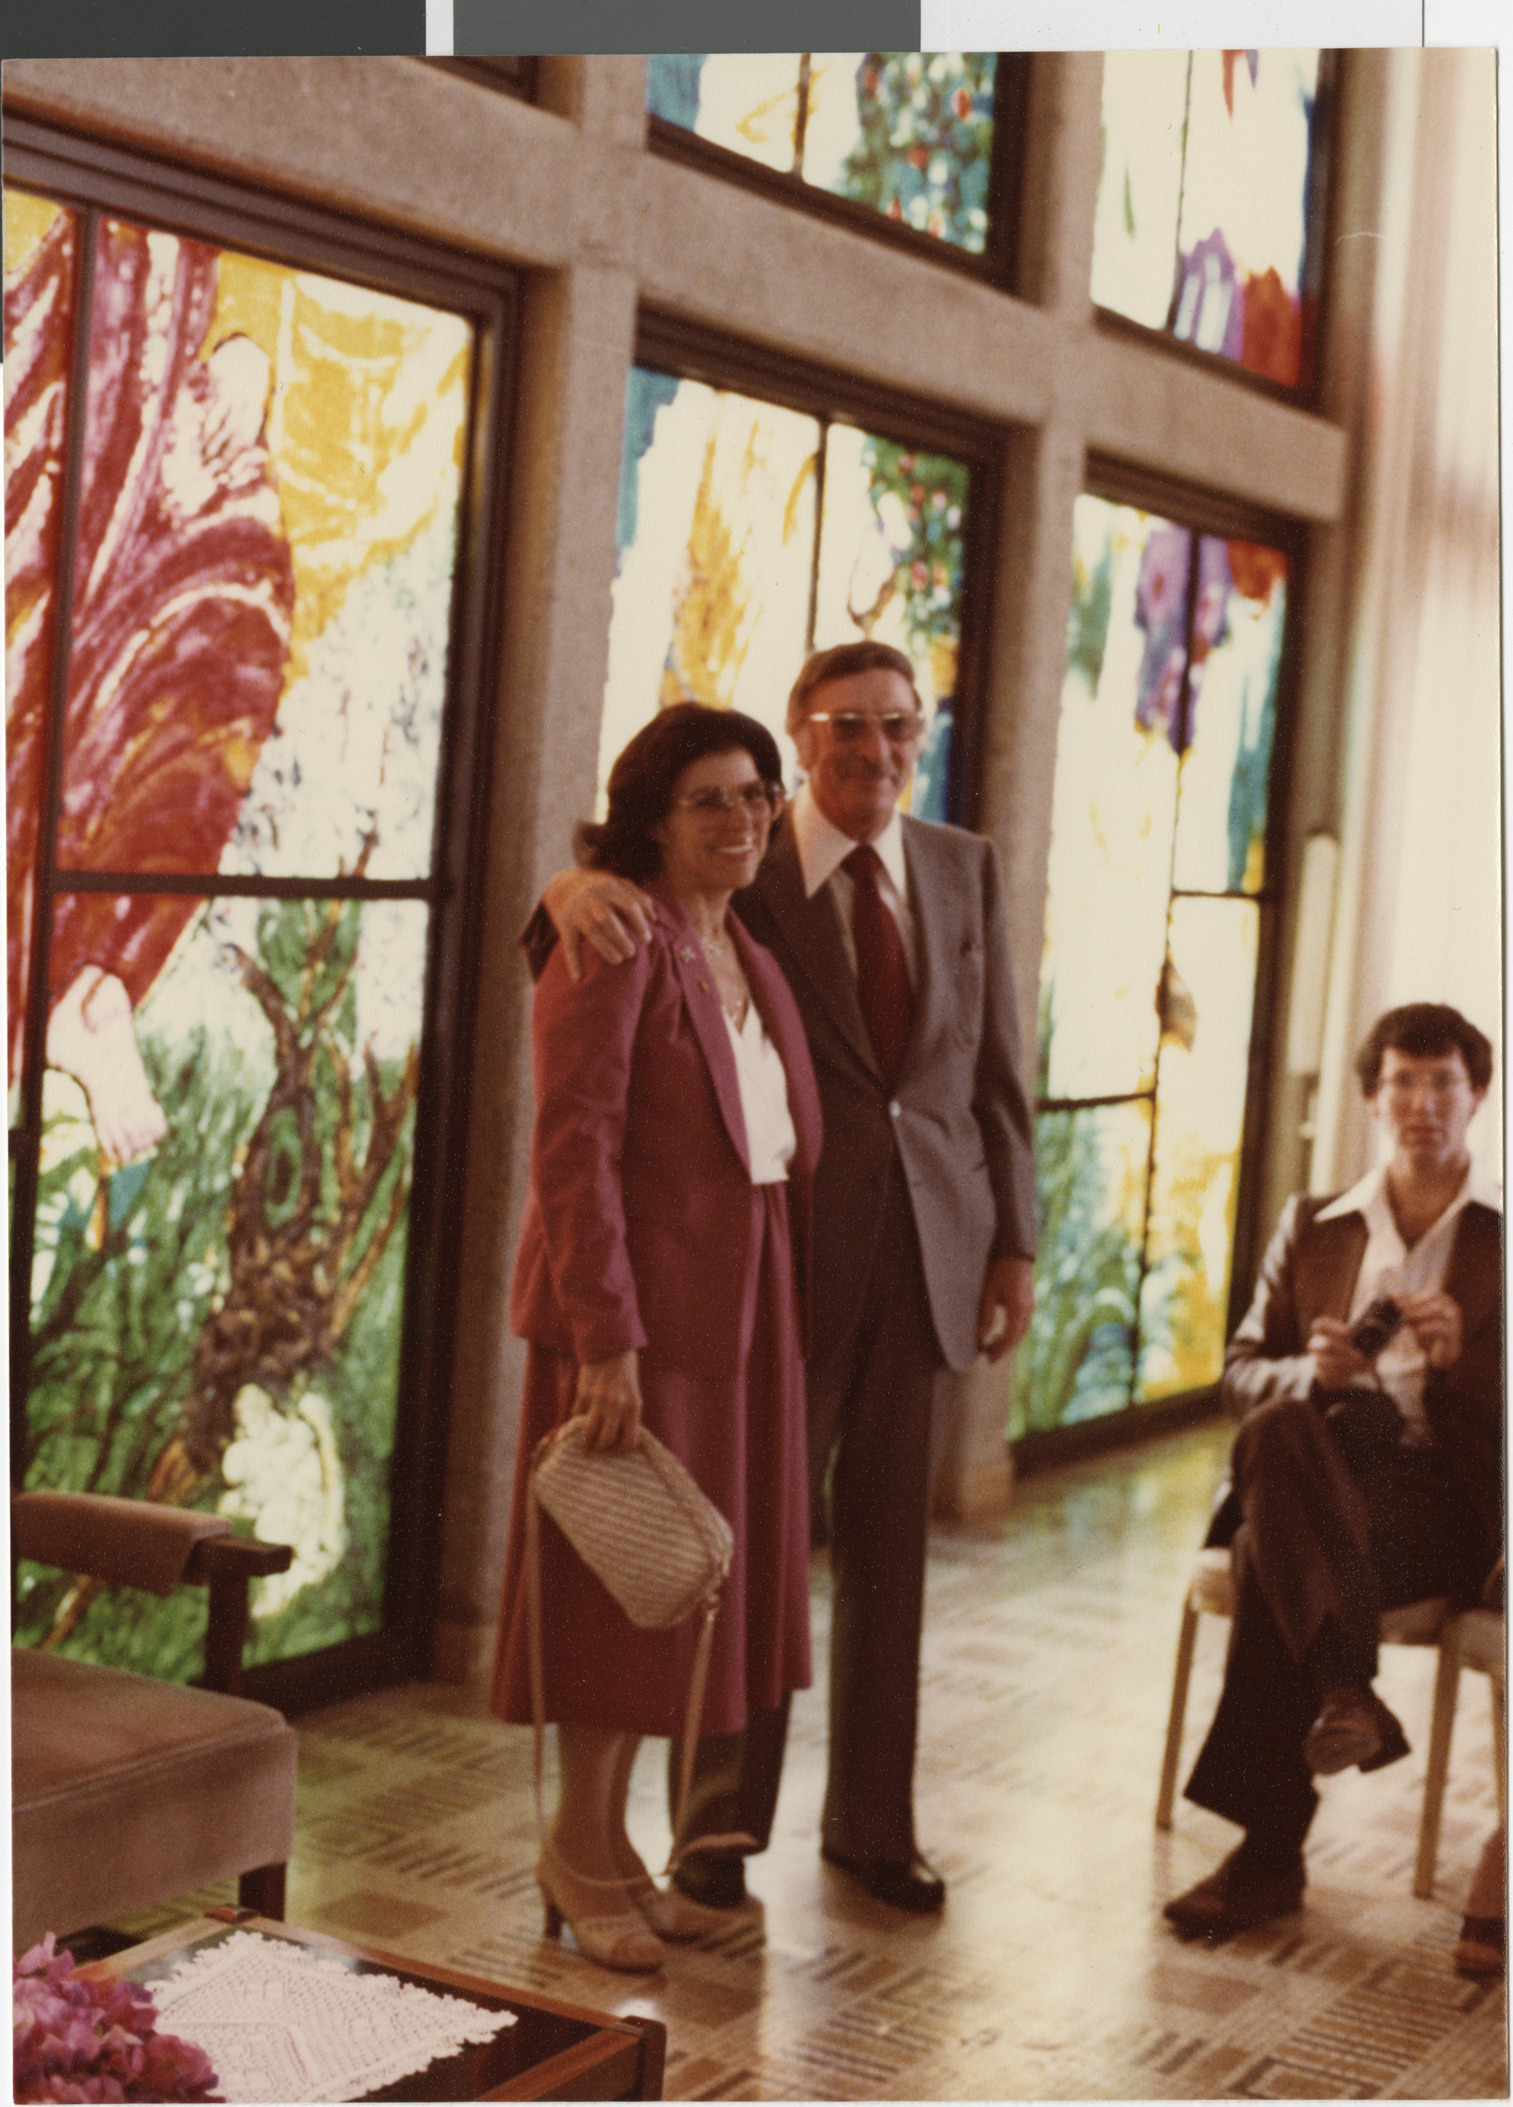 Photograph of Joyce and Jerry Mack at Temple in Jerusalem in front of Chagall windows